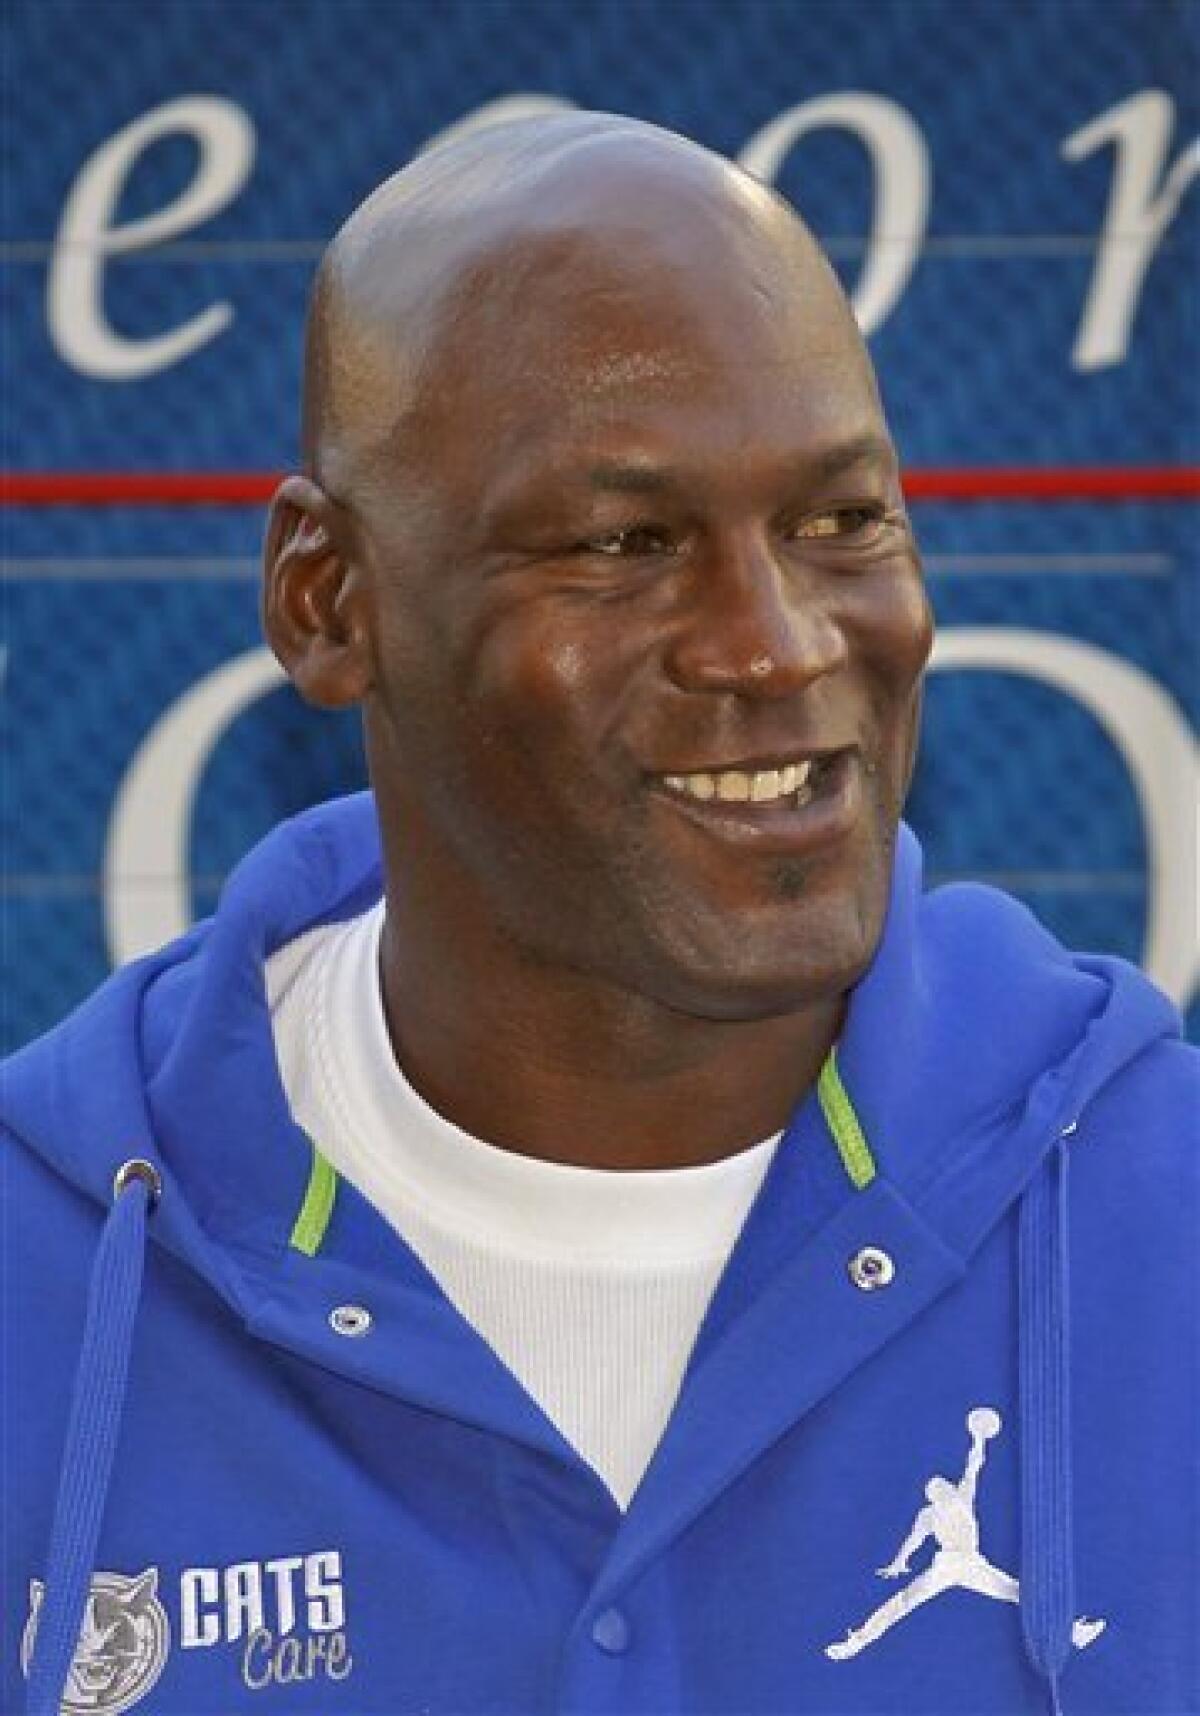 What If Michael Jordan Played For The Bobcats? 